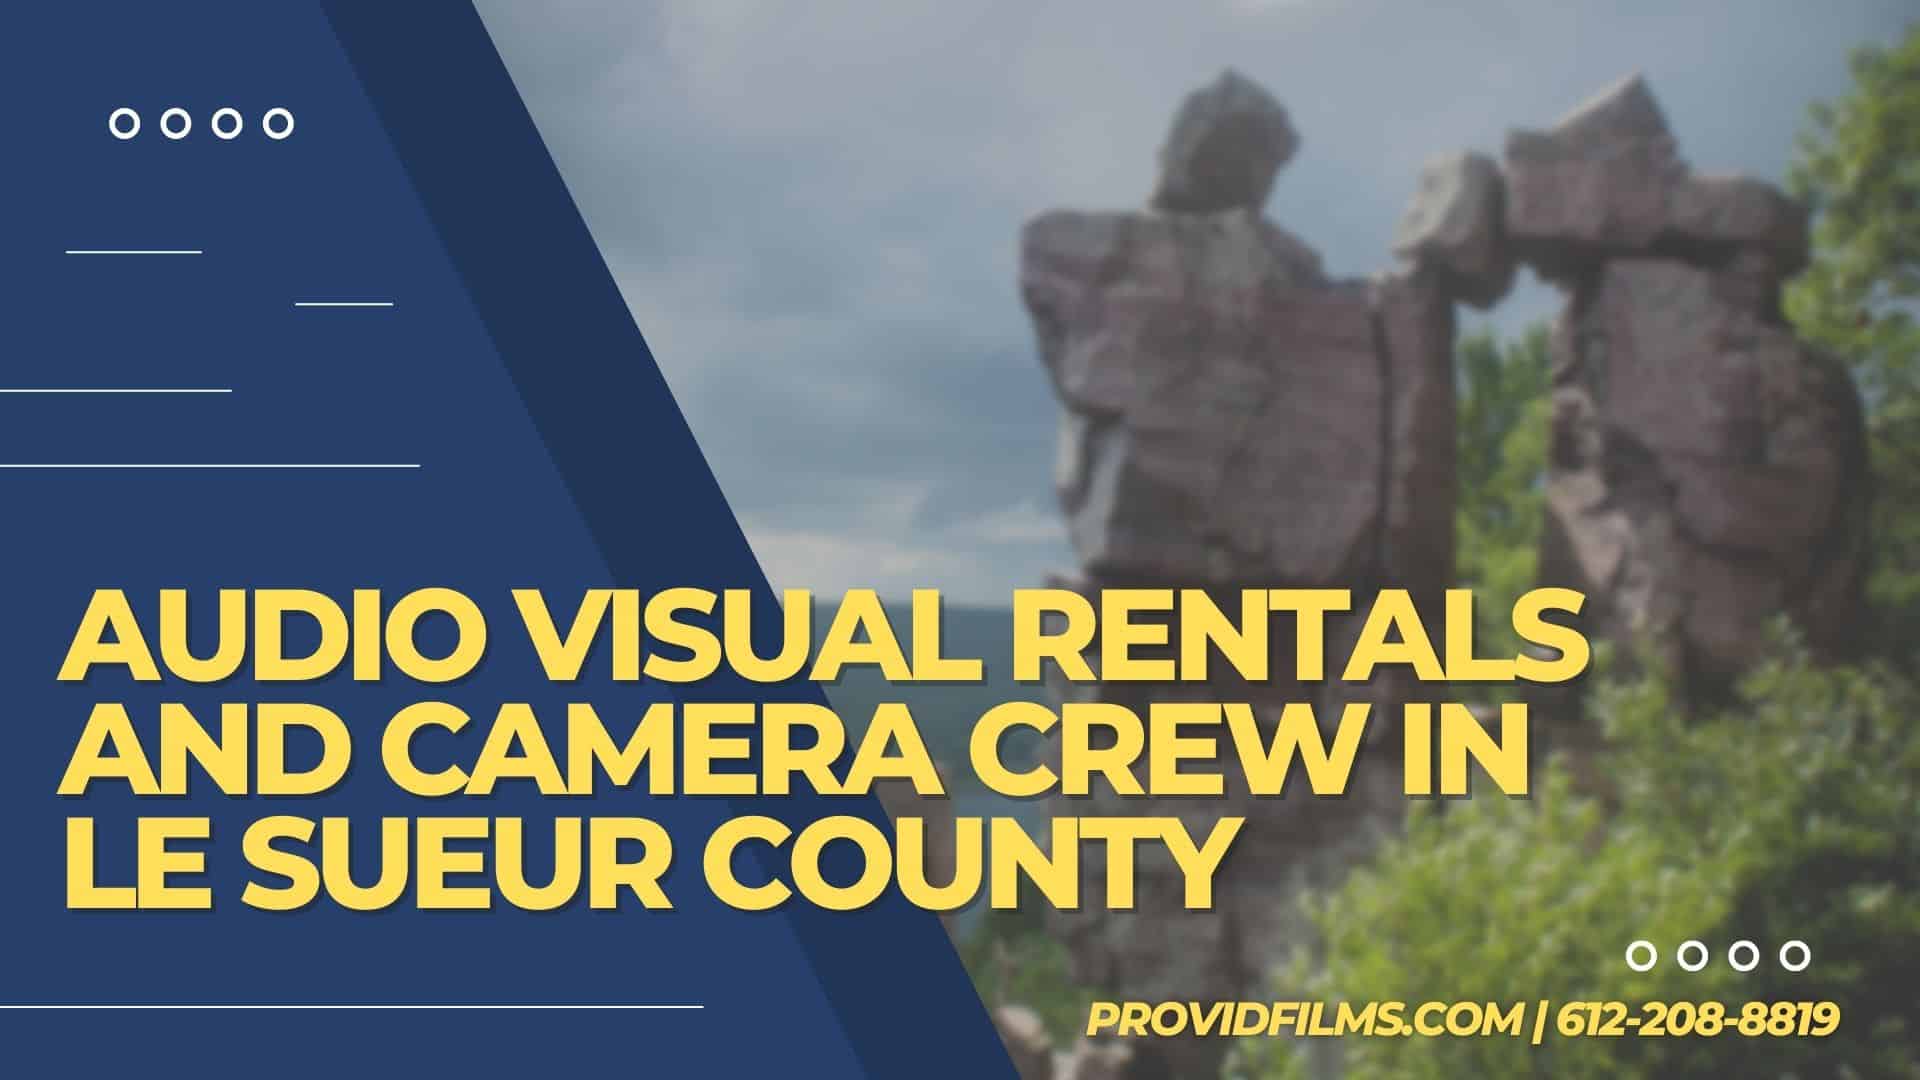 Graphic with a video camera crew with the text saying "AV Rental and Camera Crew in Le Sueur County"